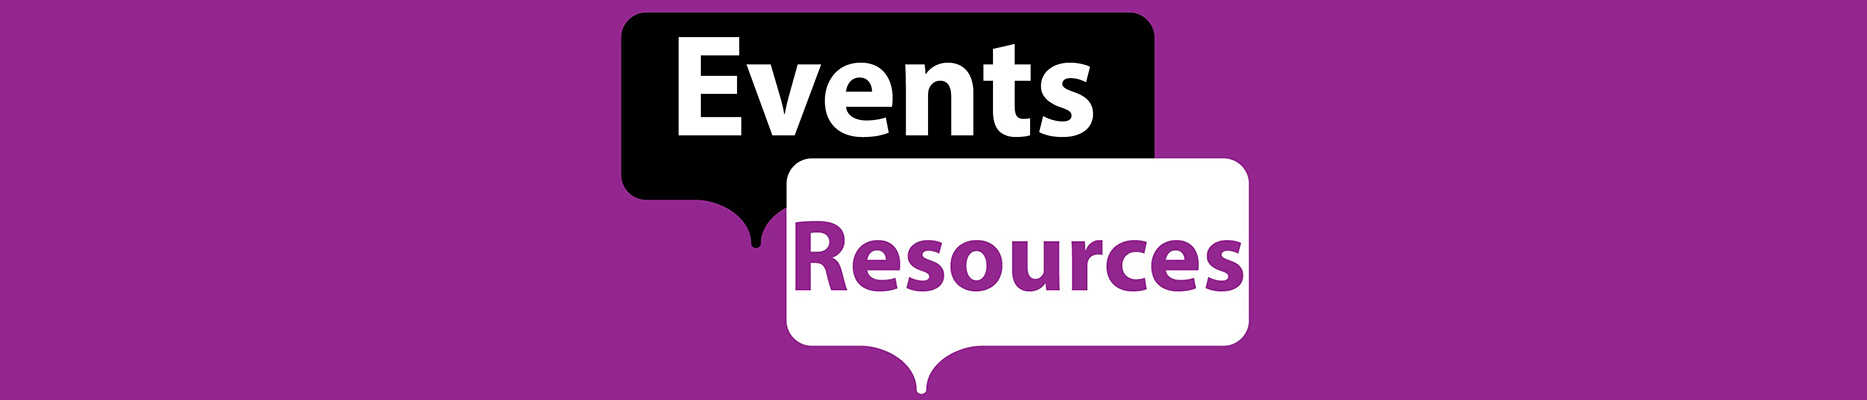 events resources